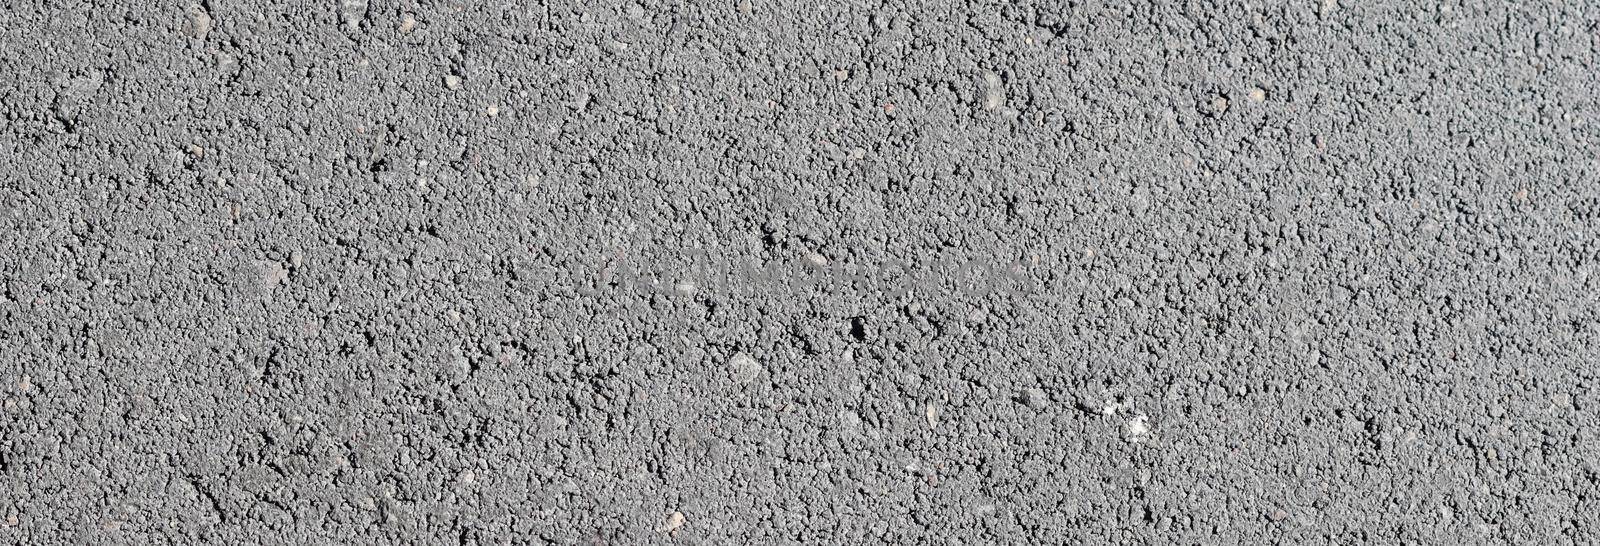 Gray cement and concrete texture for pattern and background by Olayola